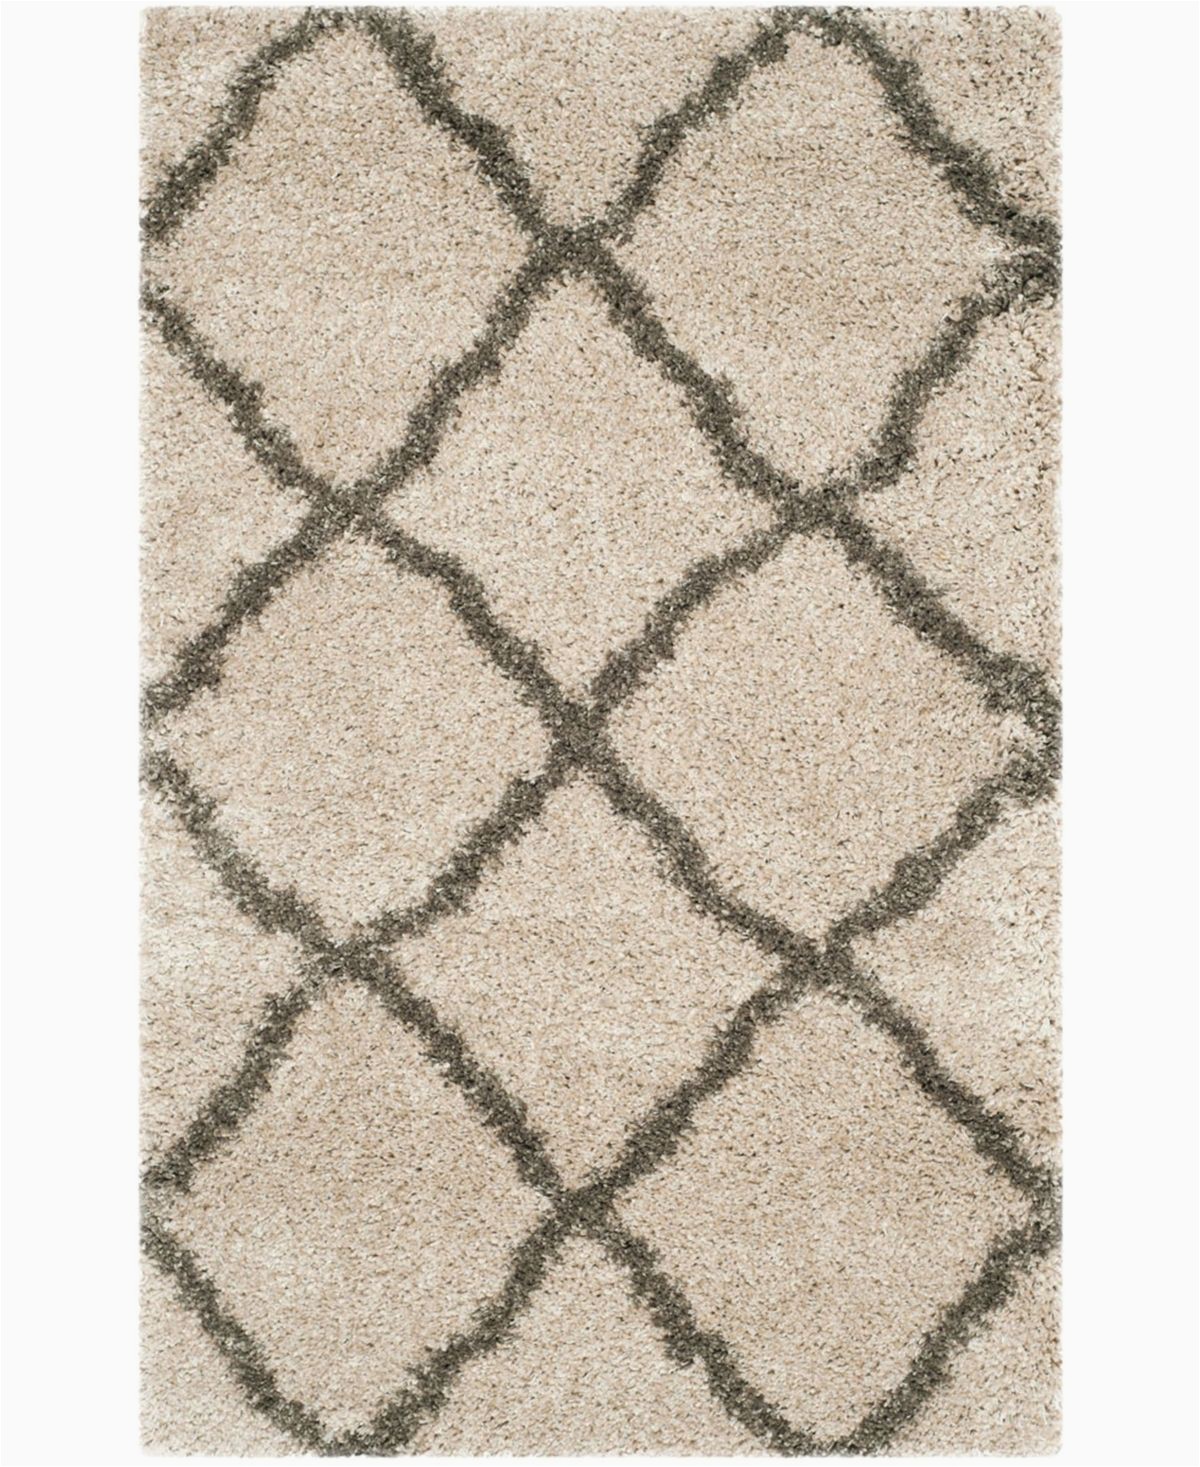 Better Homes Gardens Iron Fleur Indoor area Rug Safavieh Belize Taupe and Gray 3 X 5 area Rug & Reviews